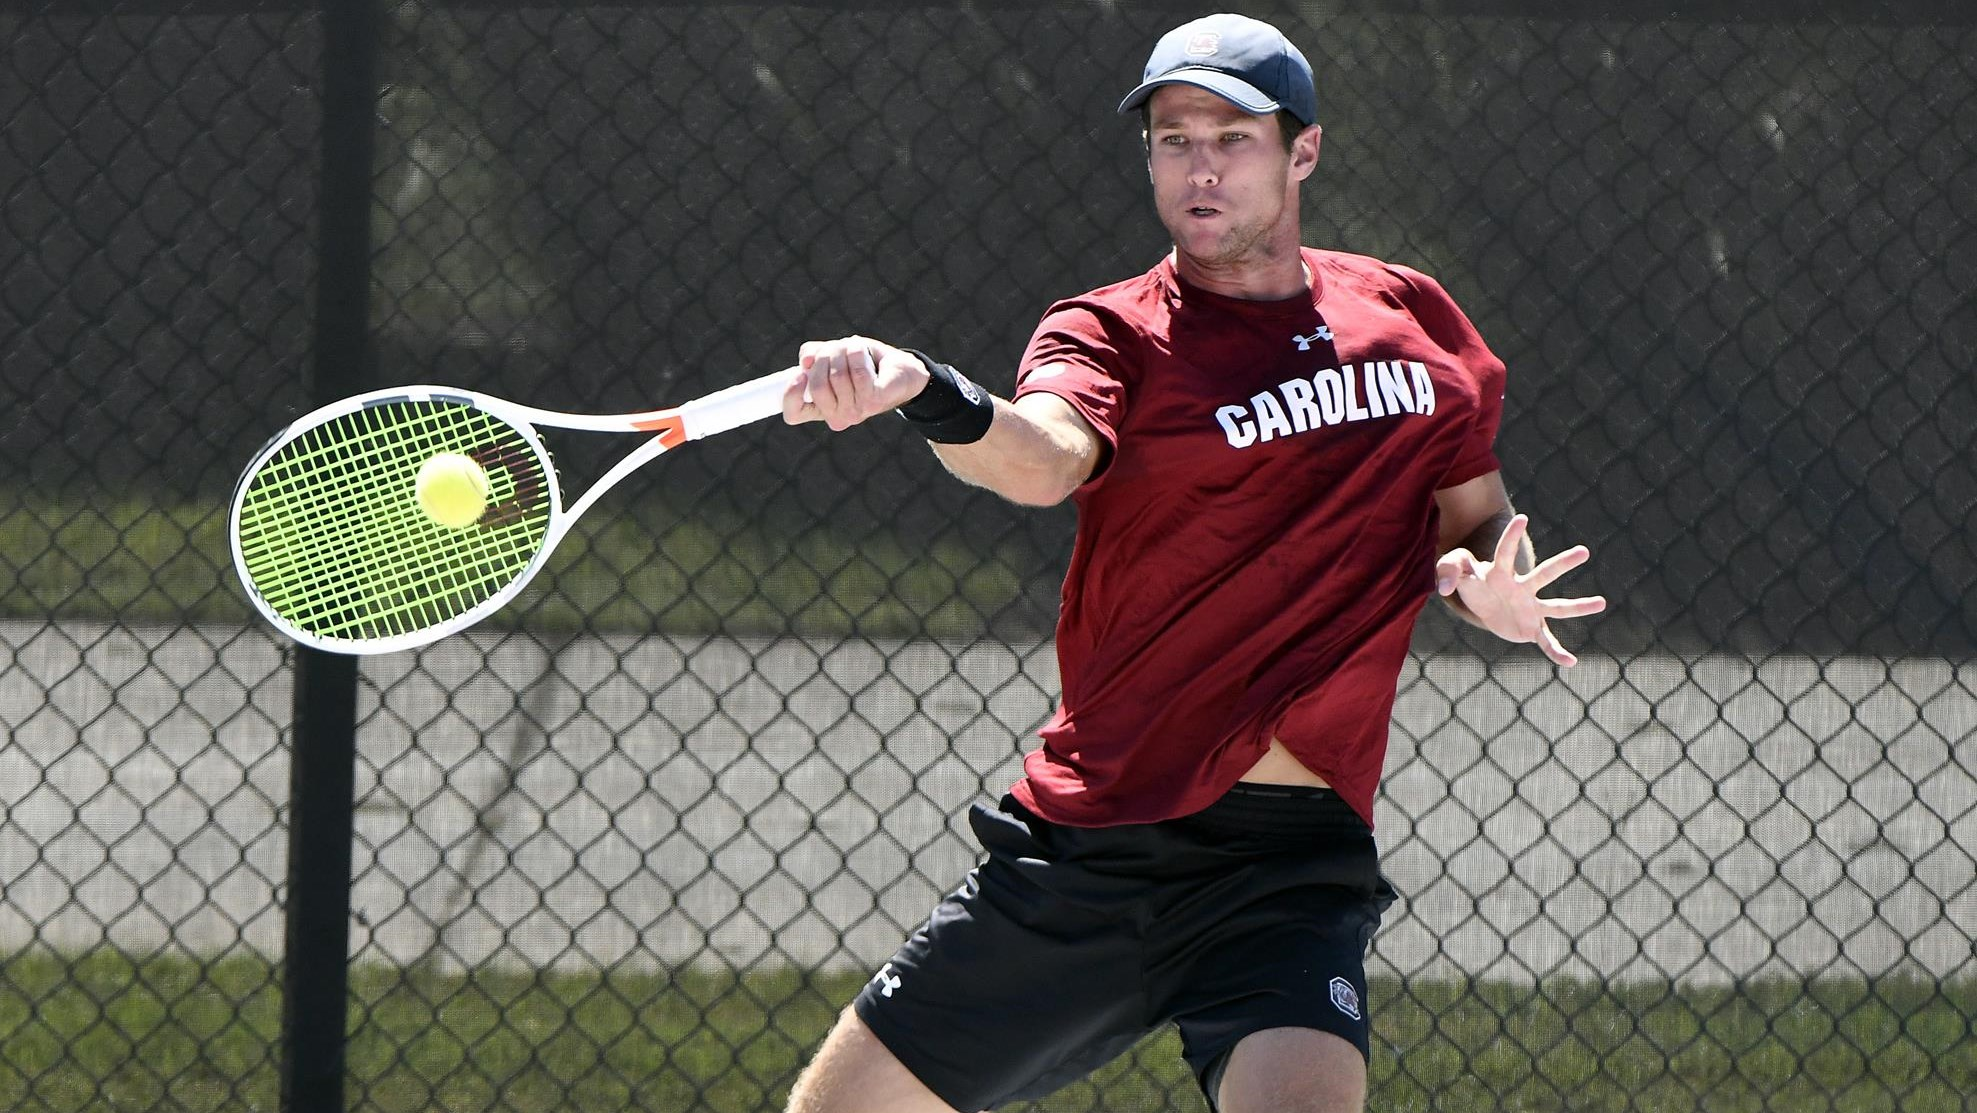 Pelletier and Brown Advance to Doubles Finals